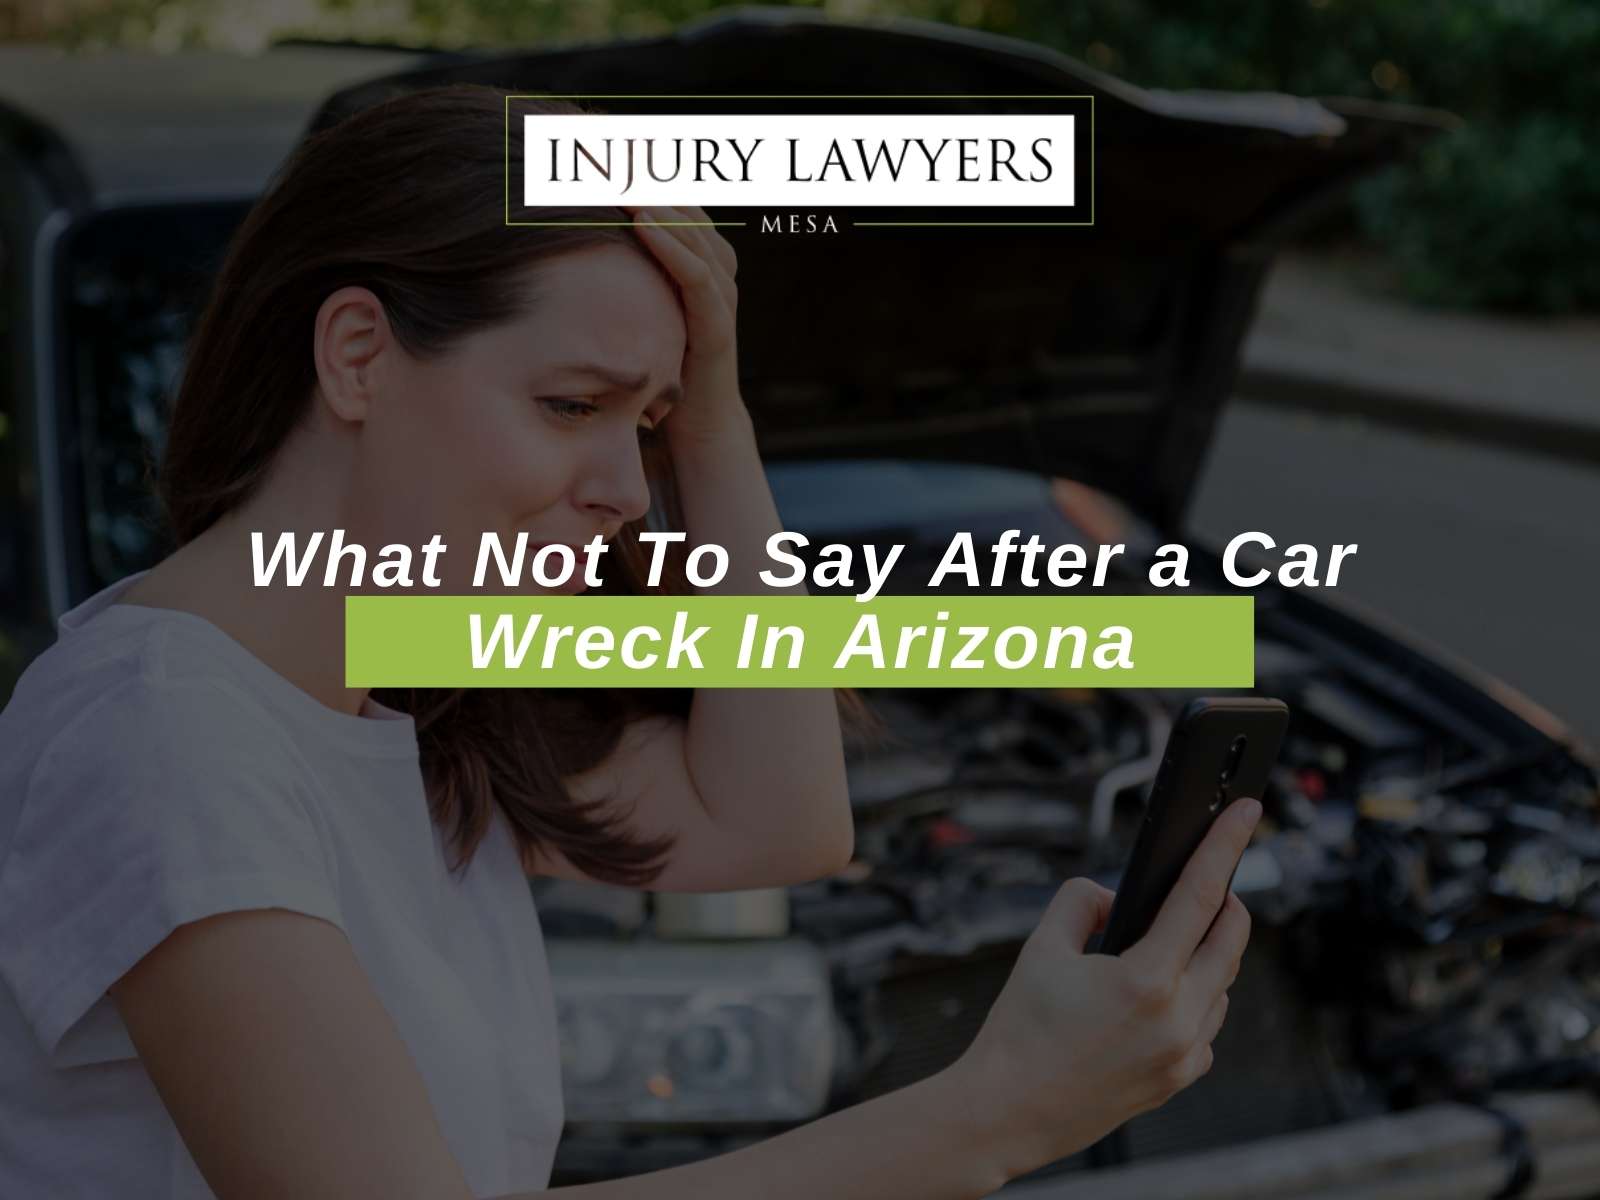 What Not To Say After a Car Wreck In Arizona